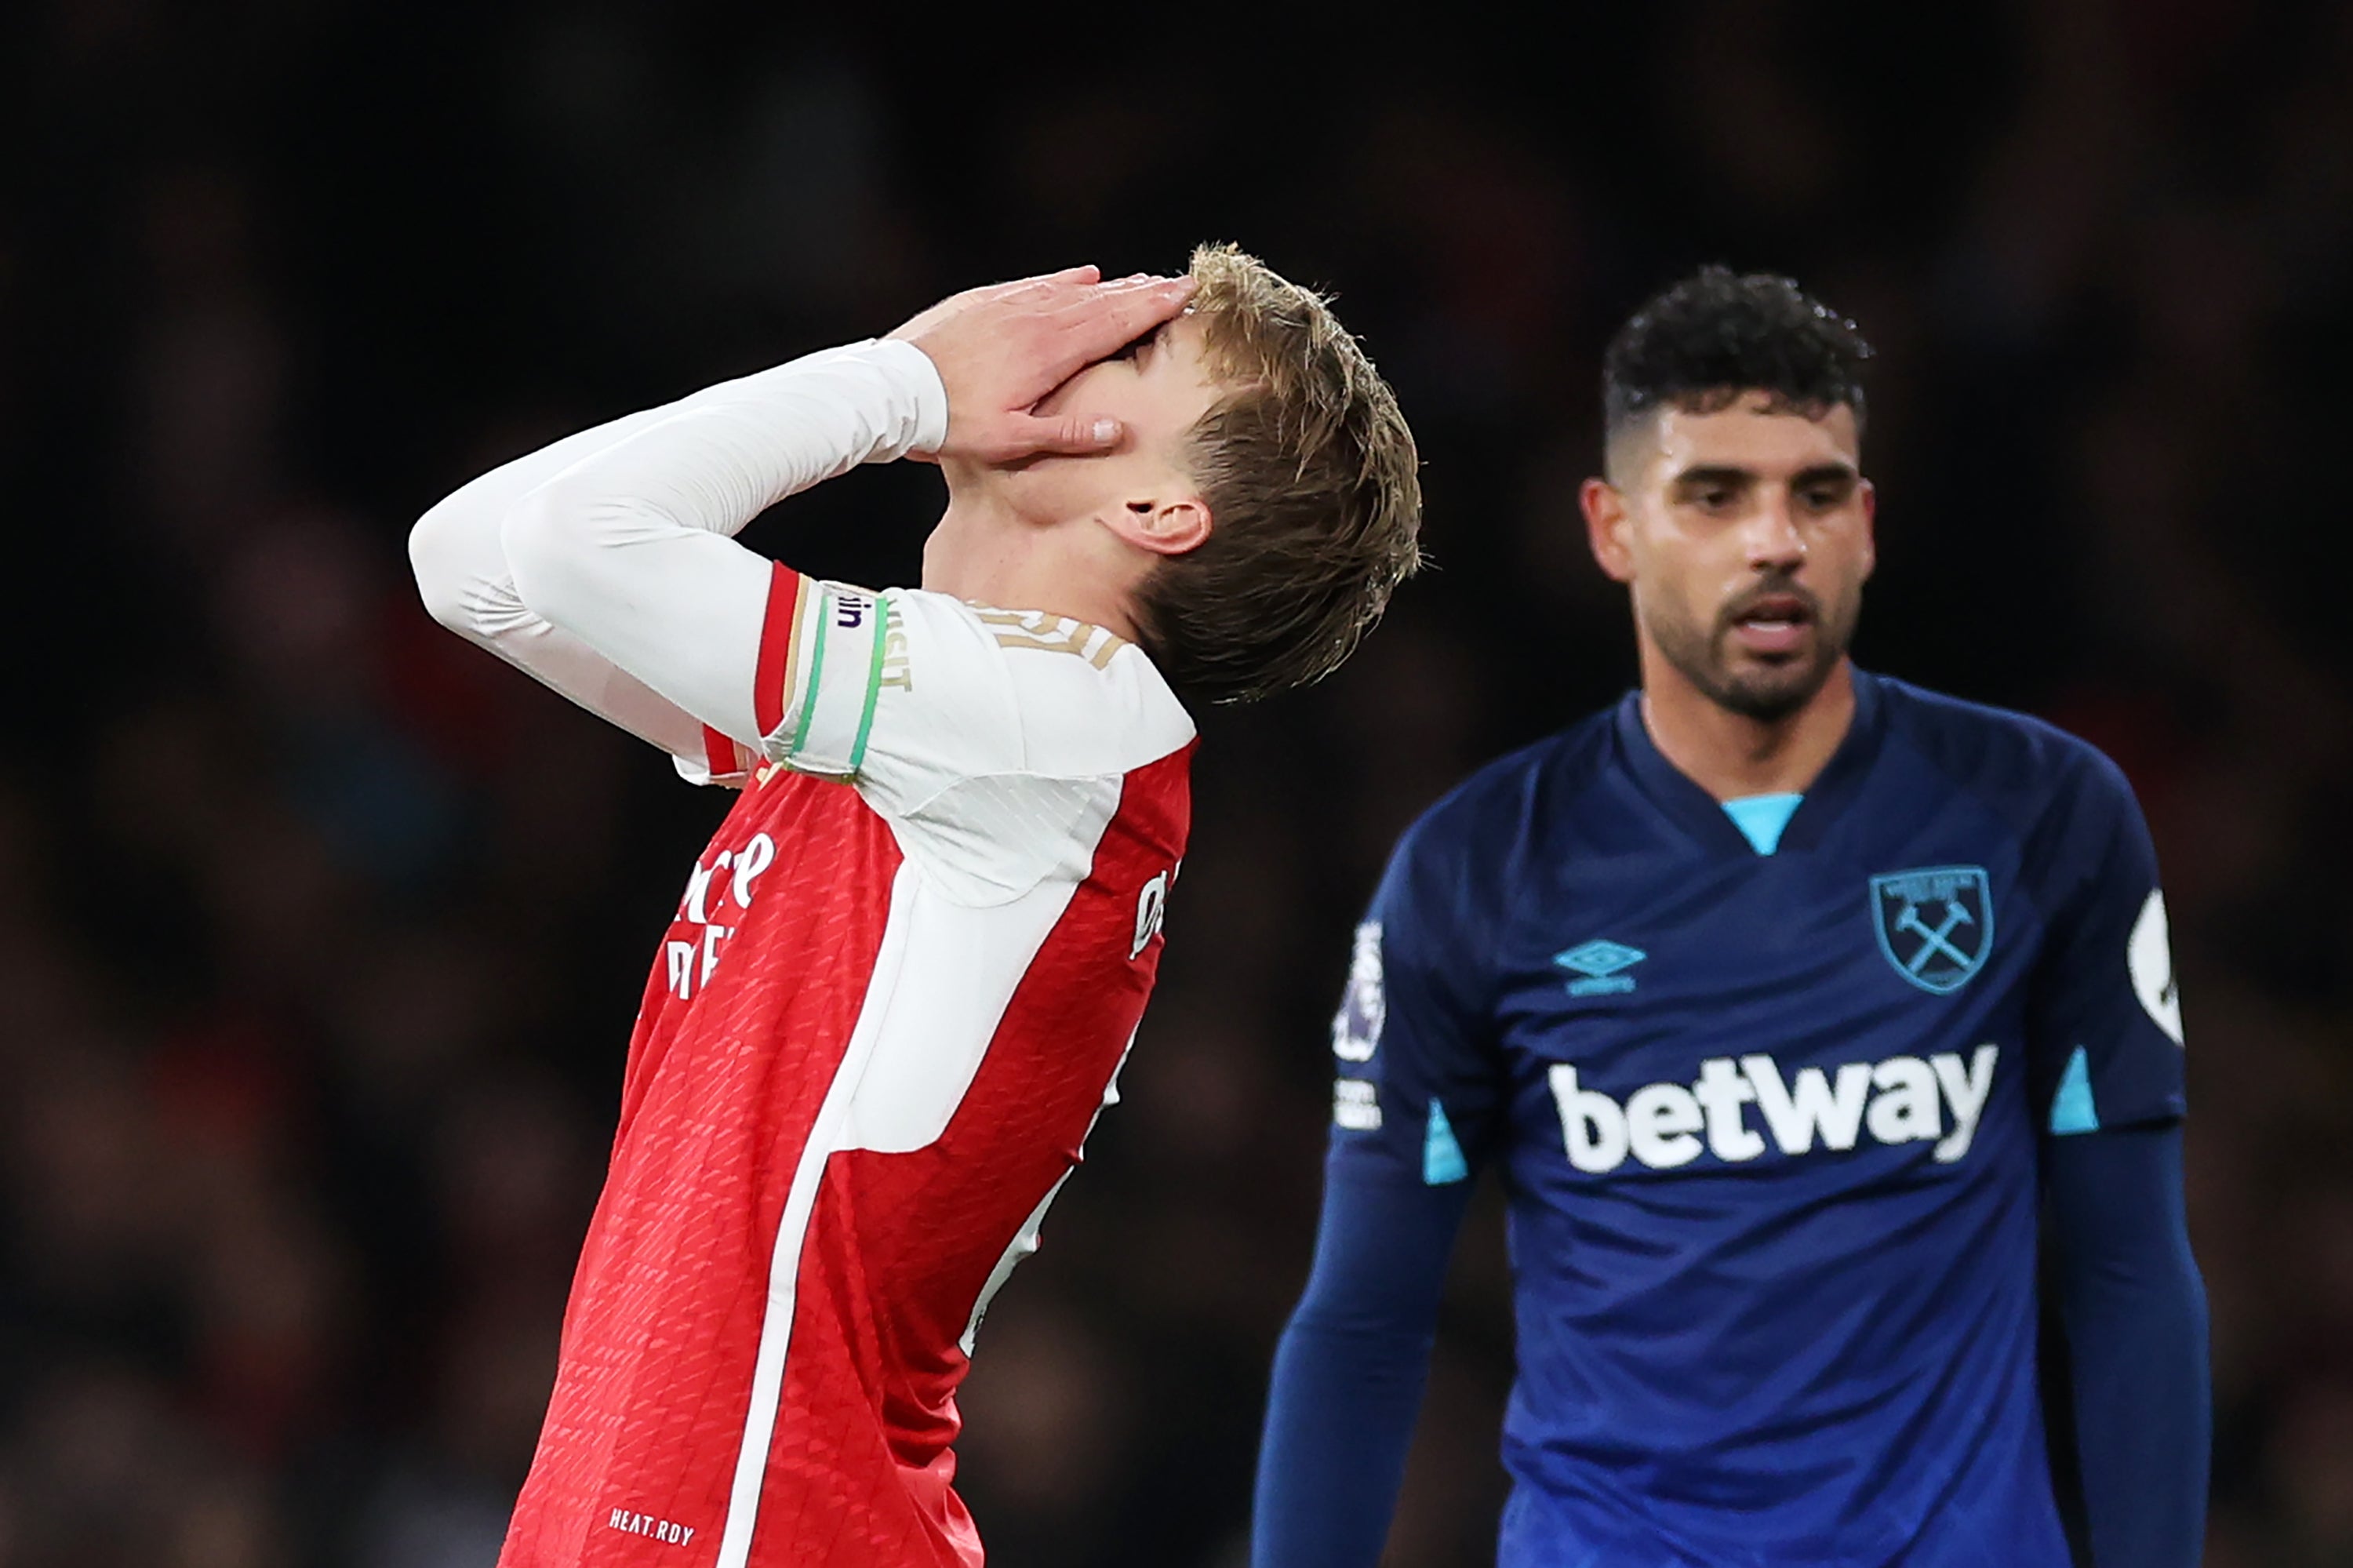 Arsenal suffered a damaging defeat